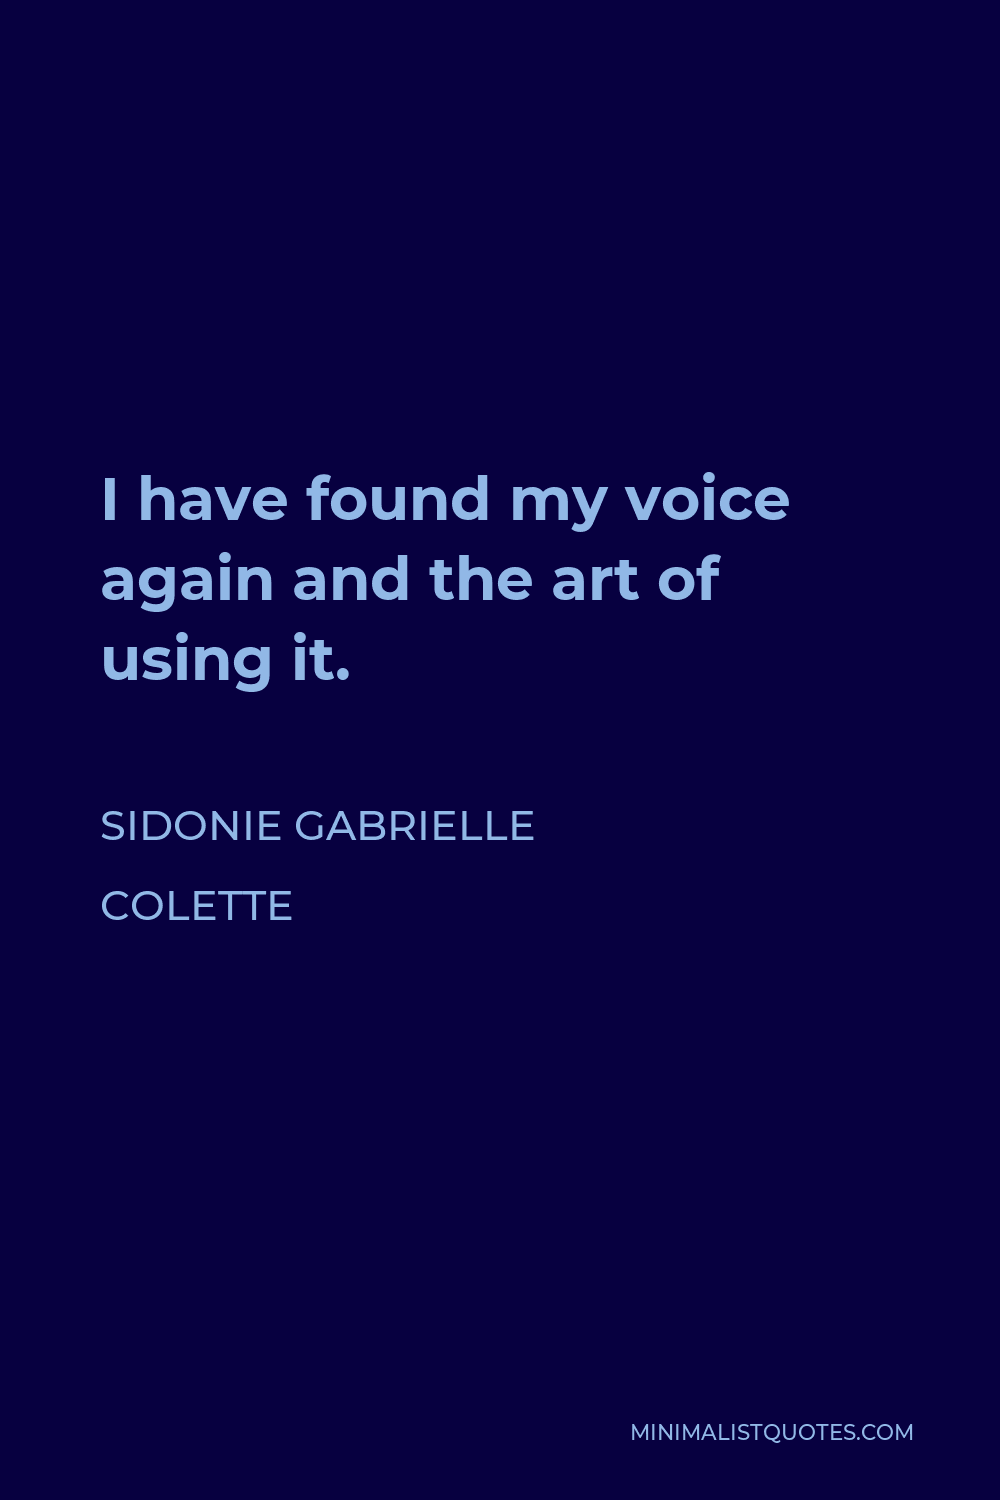 Sidonie Gabrielle Colette Quote - I have found my voice again and the art of using it.